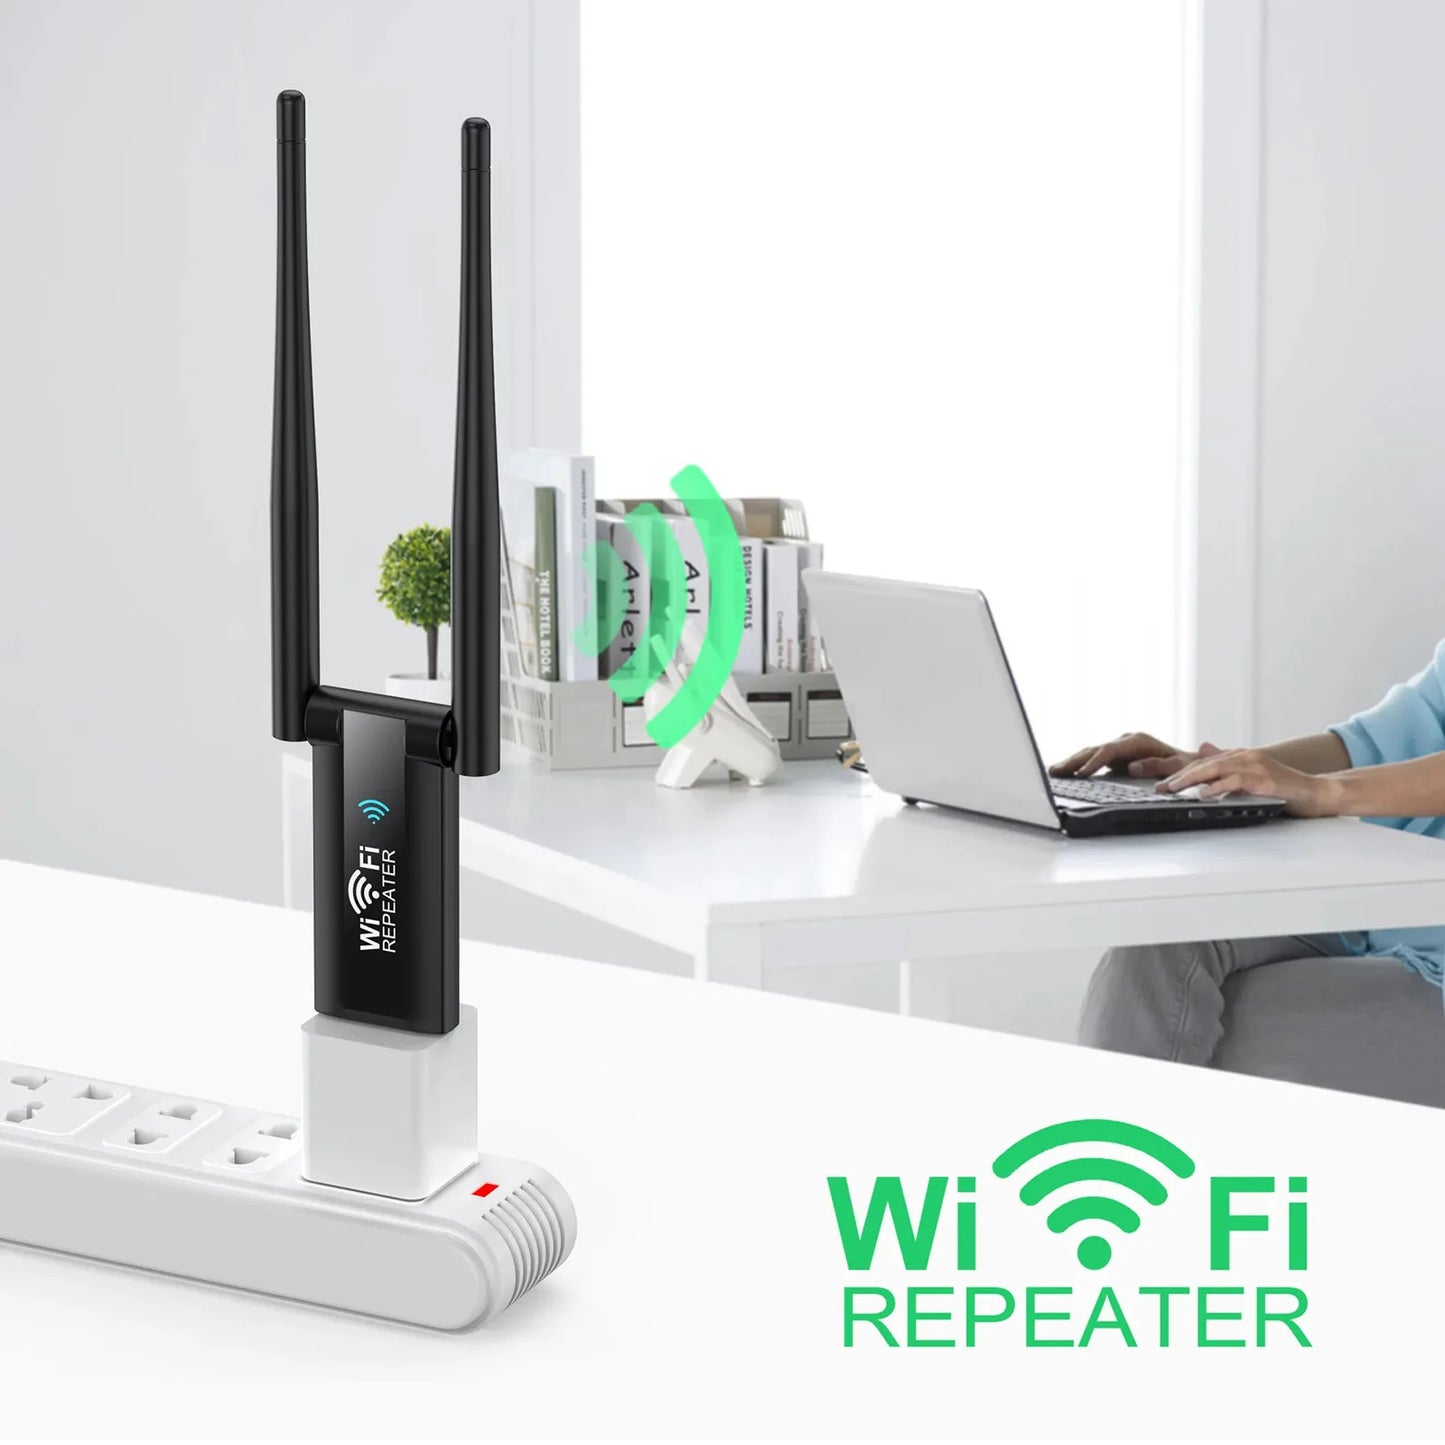 2.4G 300Mbps Wireless USB WiFi Repeater Extender WiFi Signal Amplifier Booster Long Range Wi-Fi Router Home Network Extension